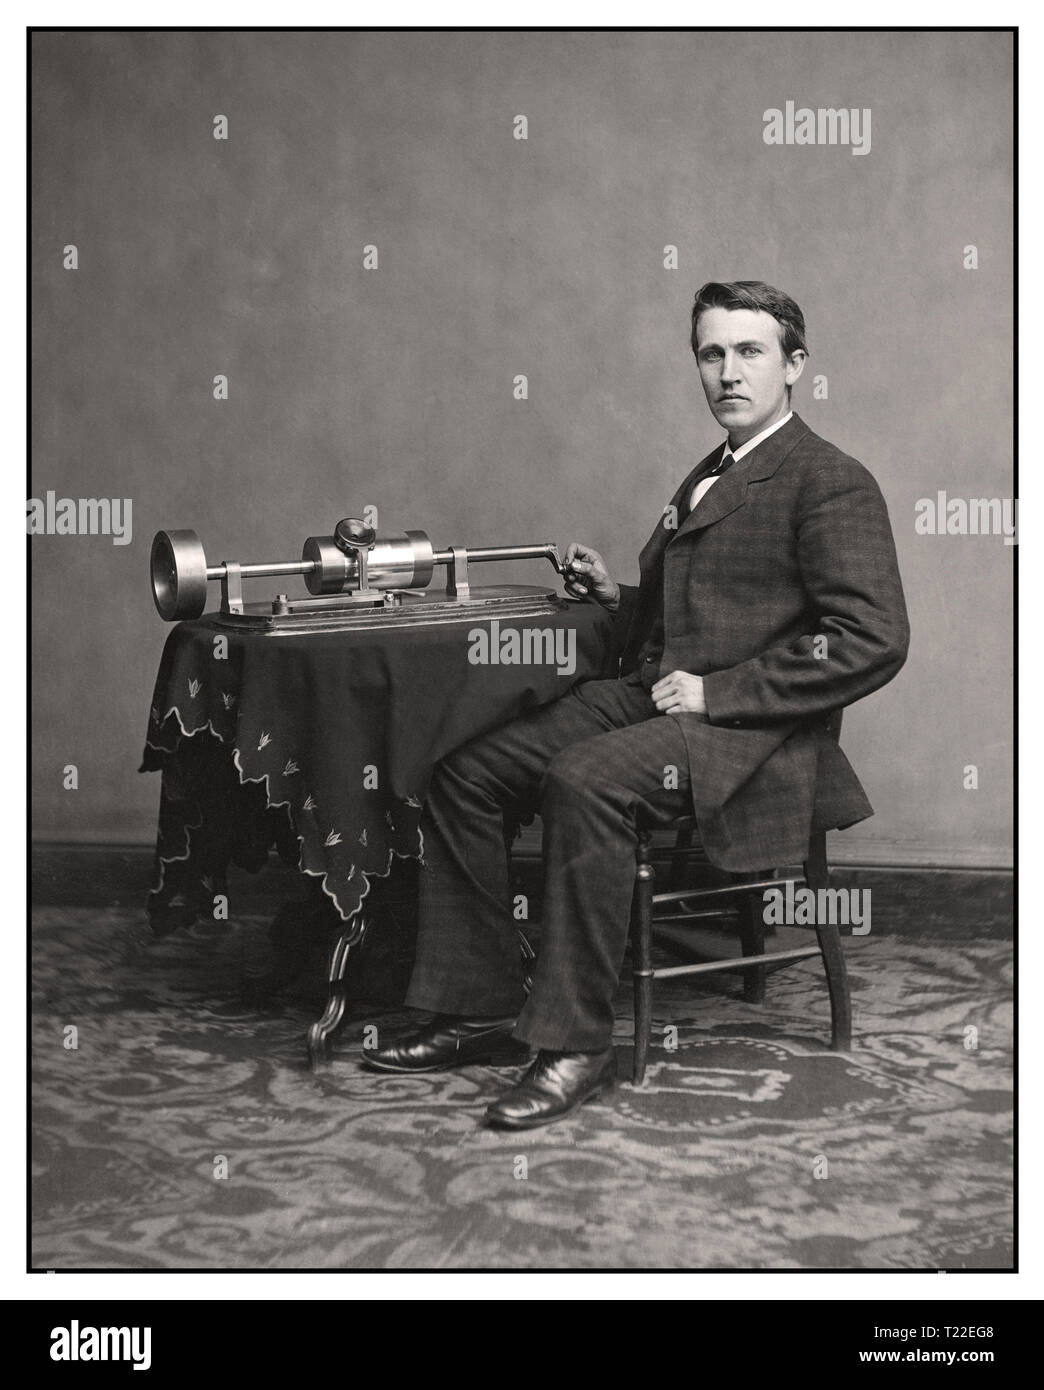 Thomas Edison and his early phonograph. circa 1877 “Thomas A. Edison.” On Nov 21, 1877, Thomas Edison introduced his phonograph machine to the world, a brilliant device to record and playback sound. The sound vibrations of his voice would be indented onto the cylinder by the recording needle.. Stock Photo